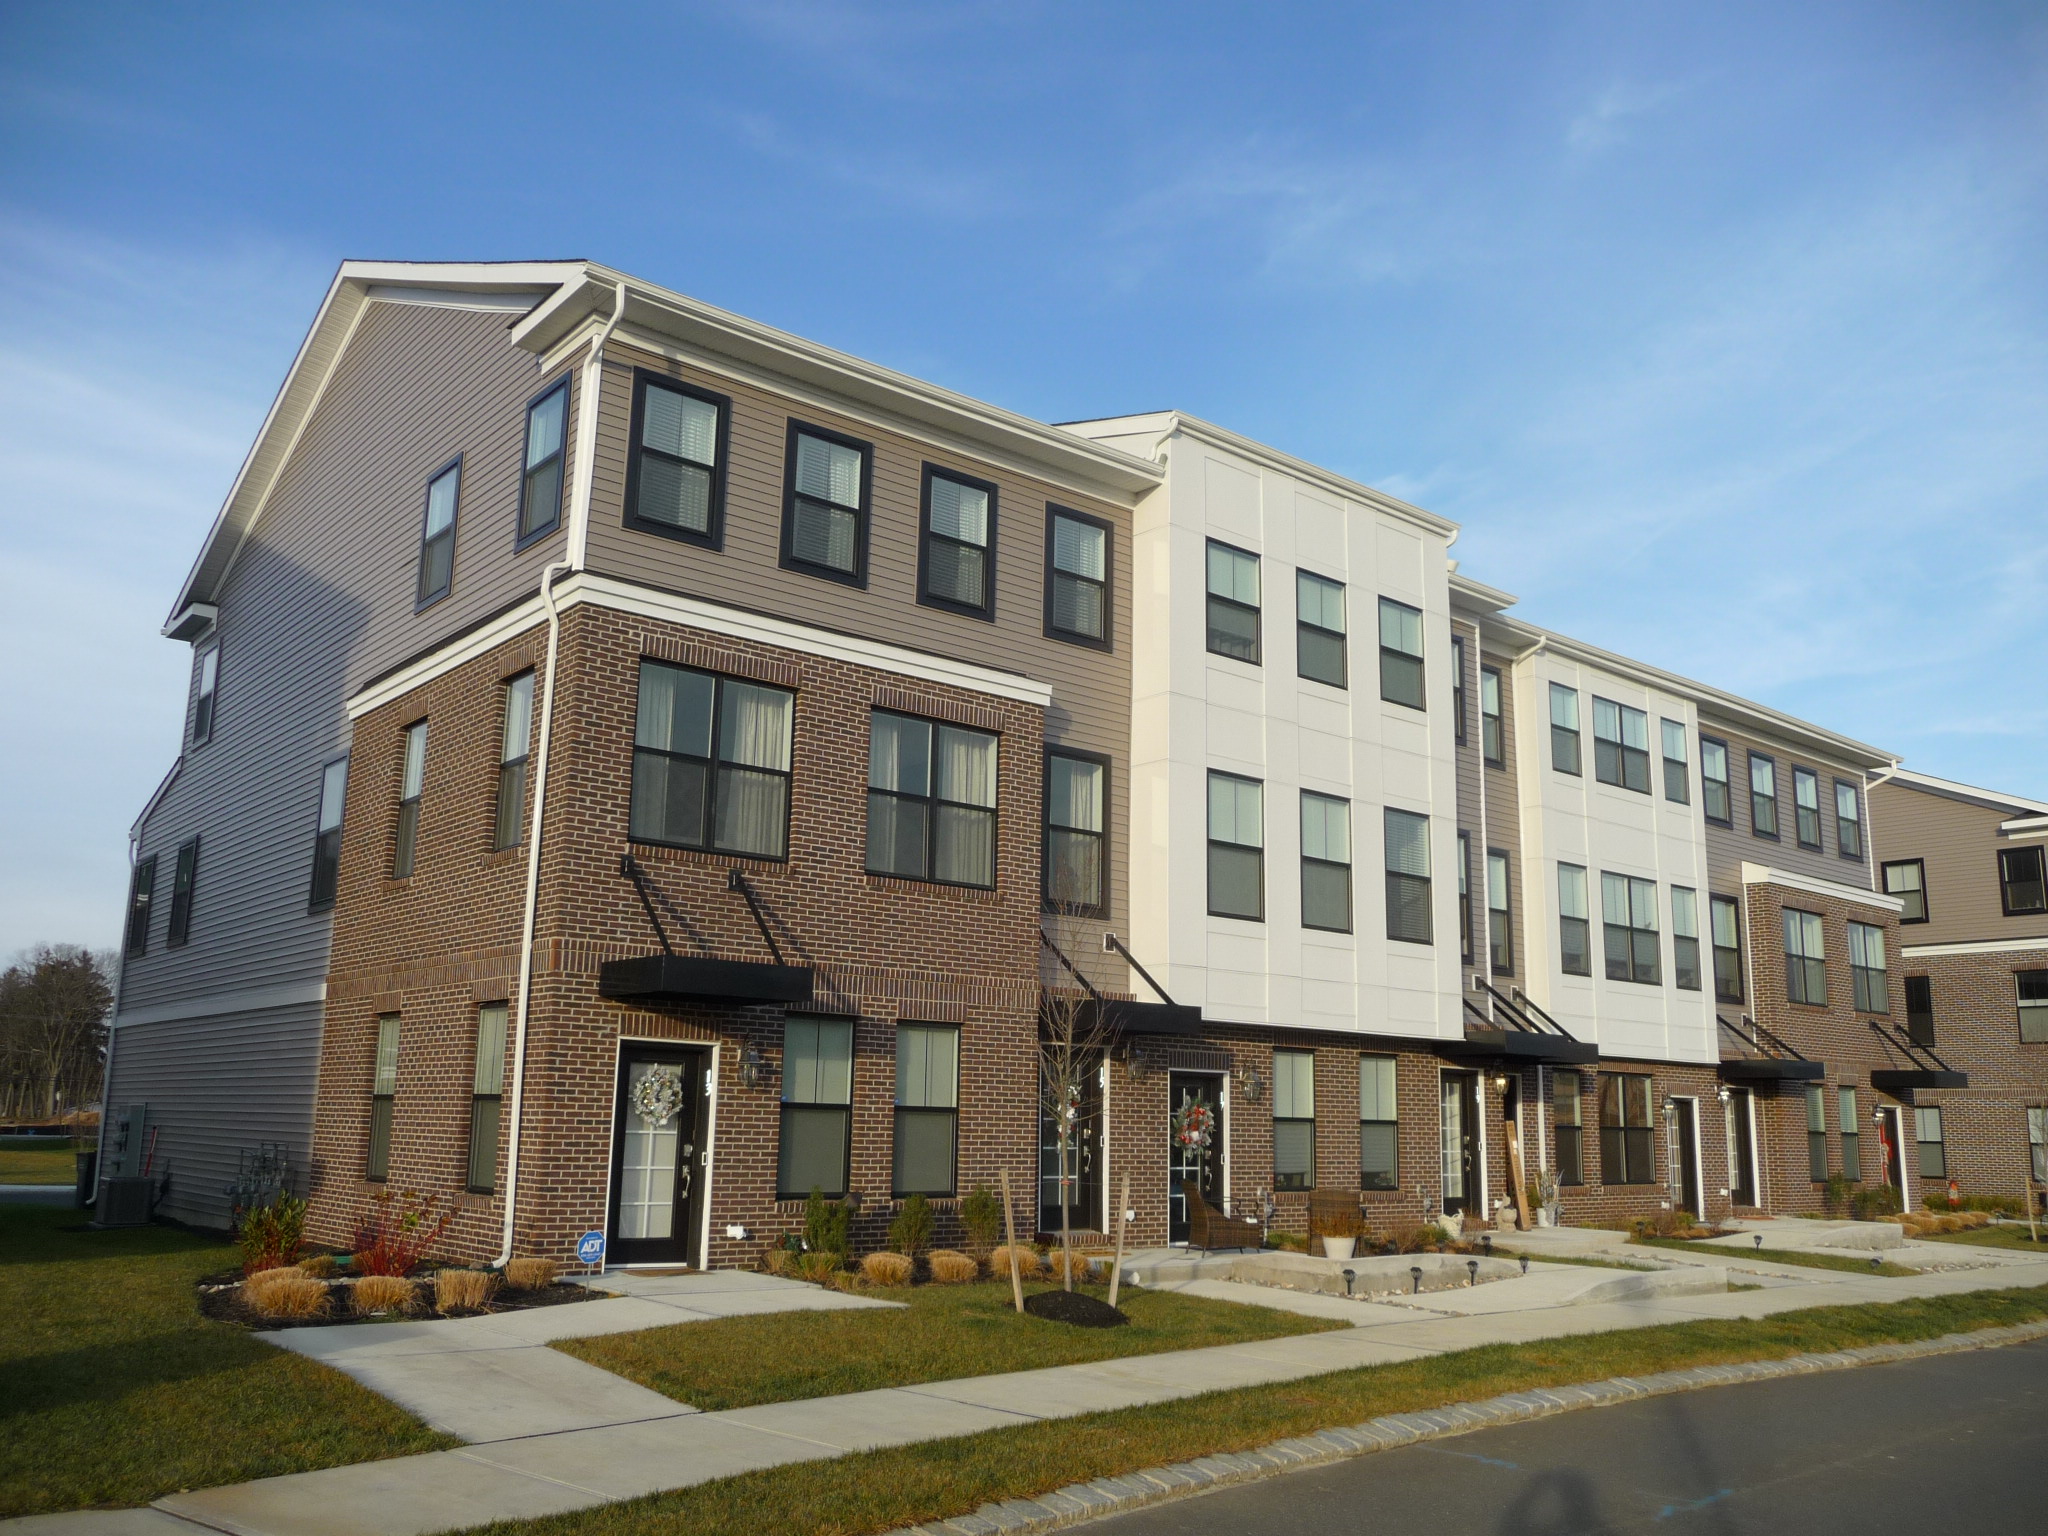 A example of the townhouses at Patriot's Square.